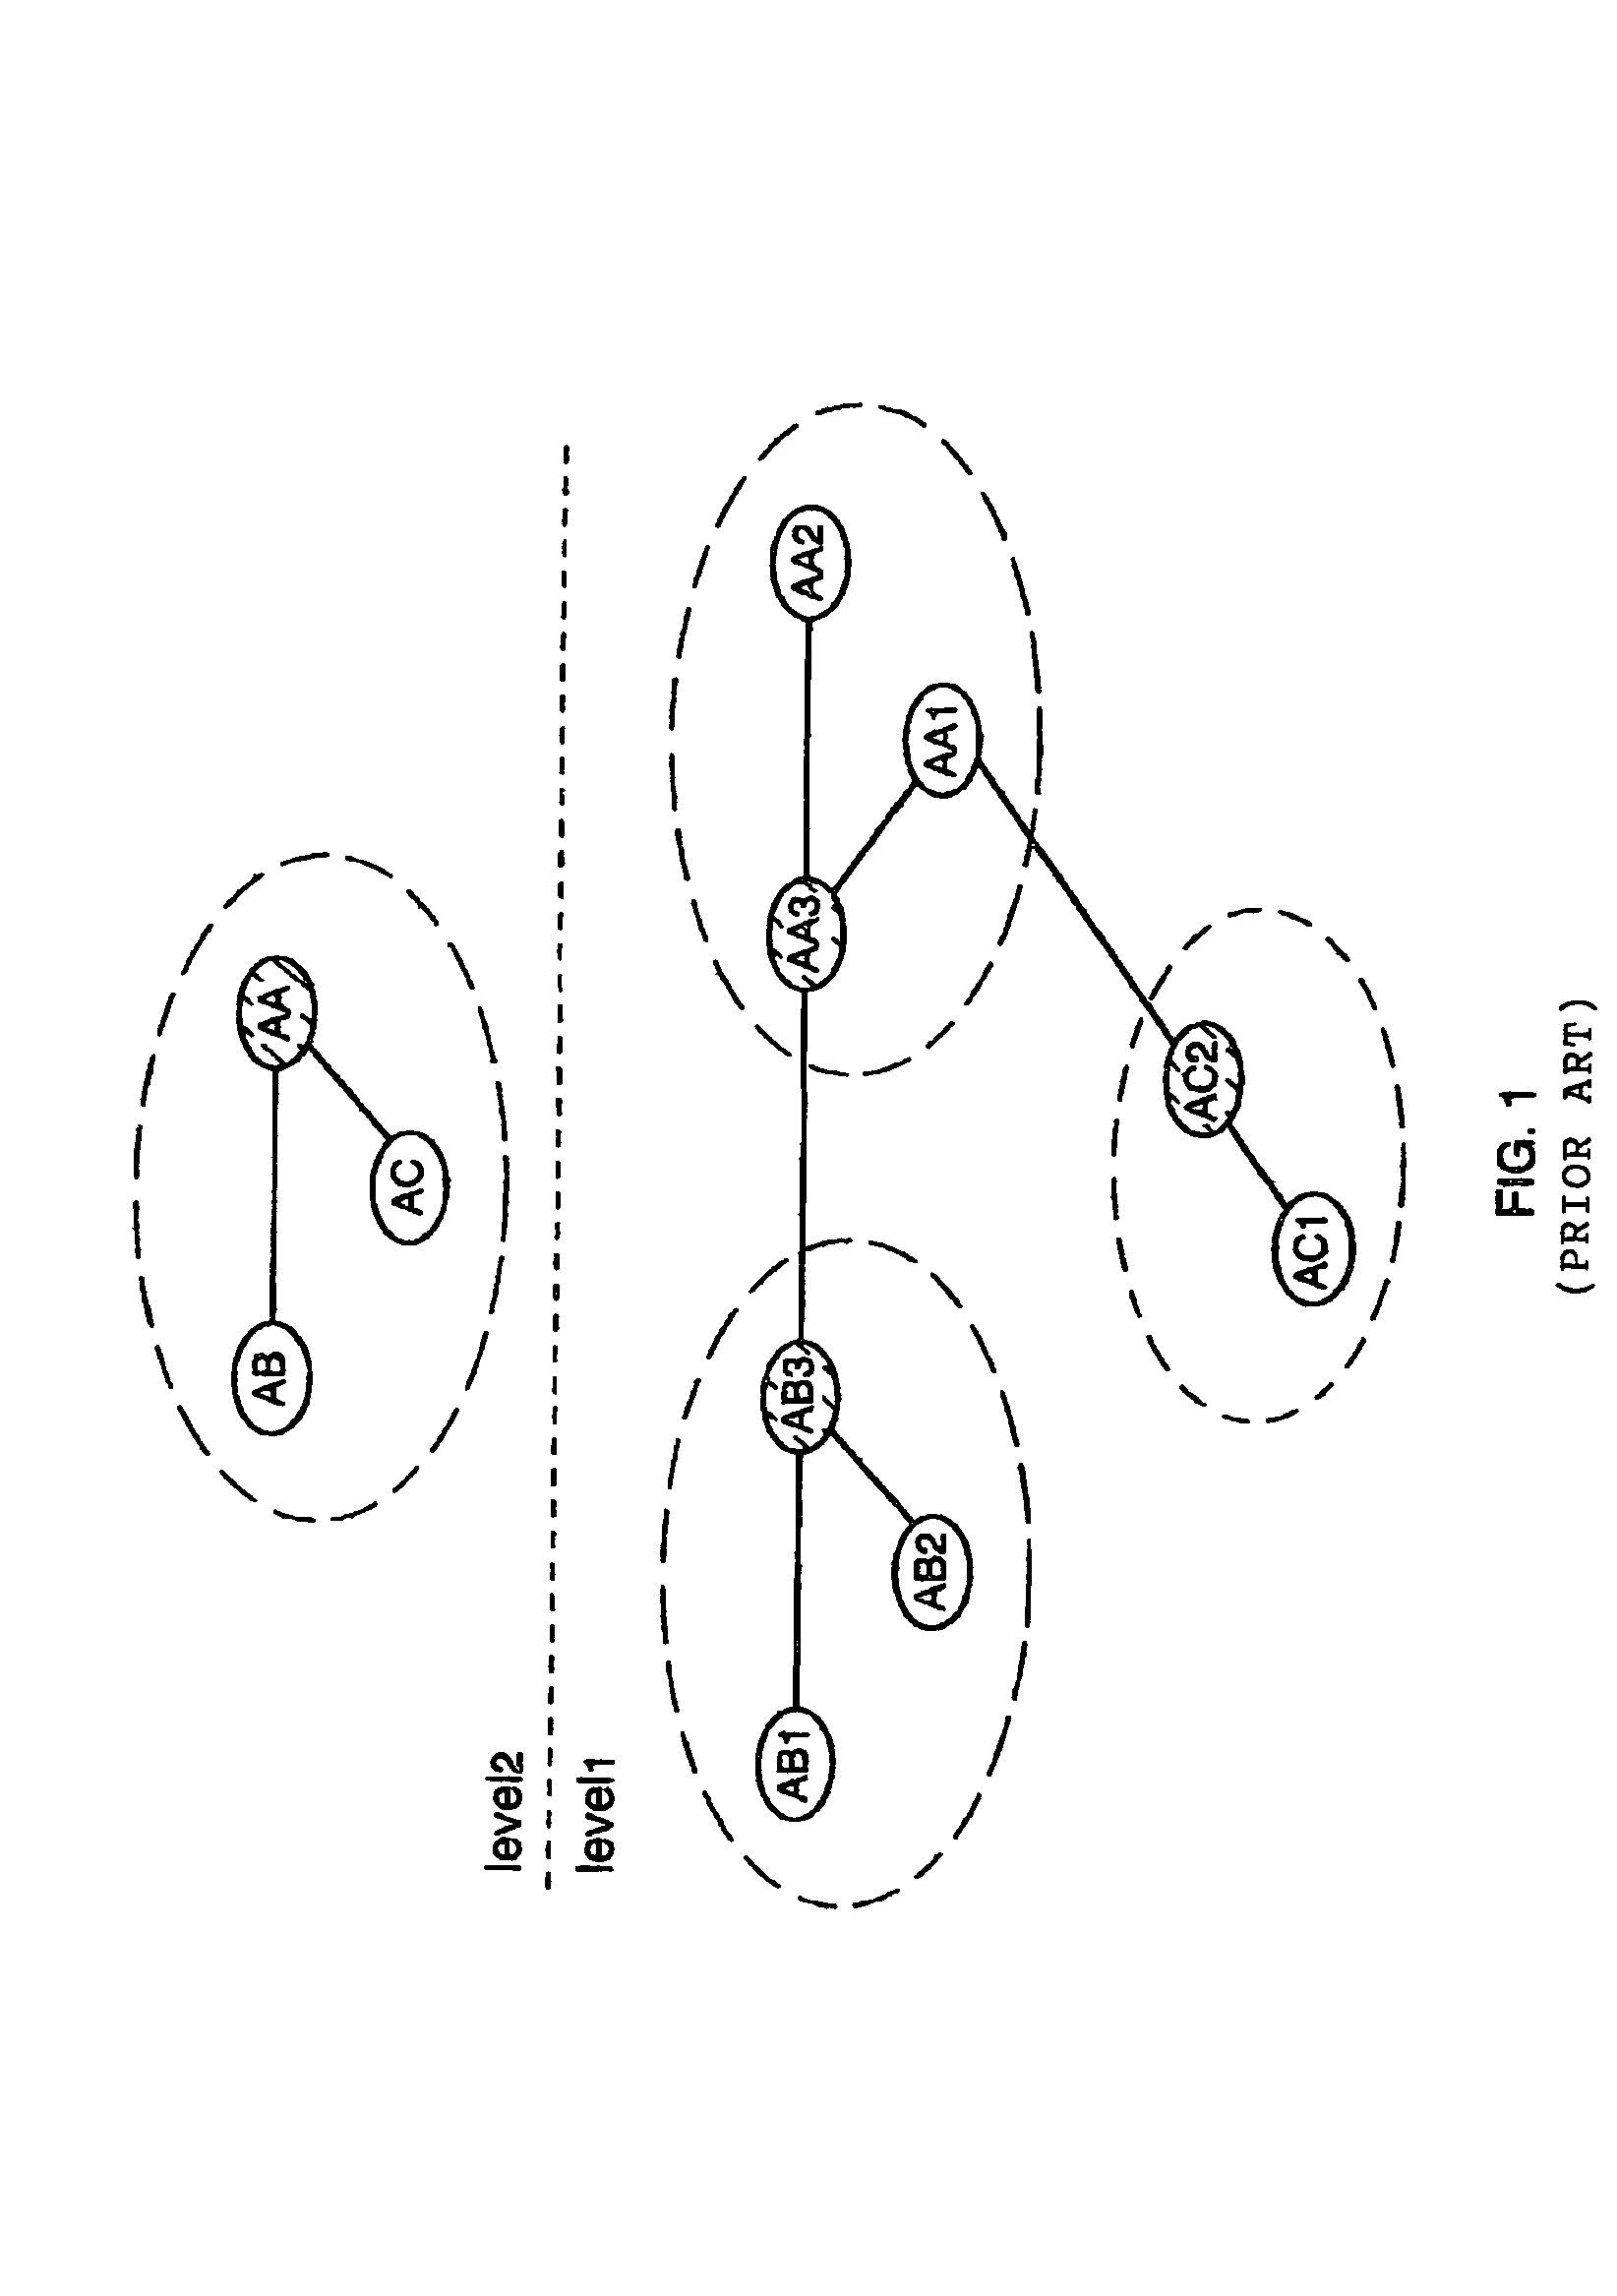 Address management in PNNI hierarchical networks